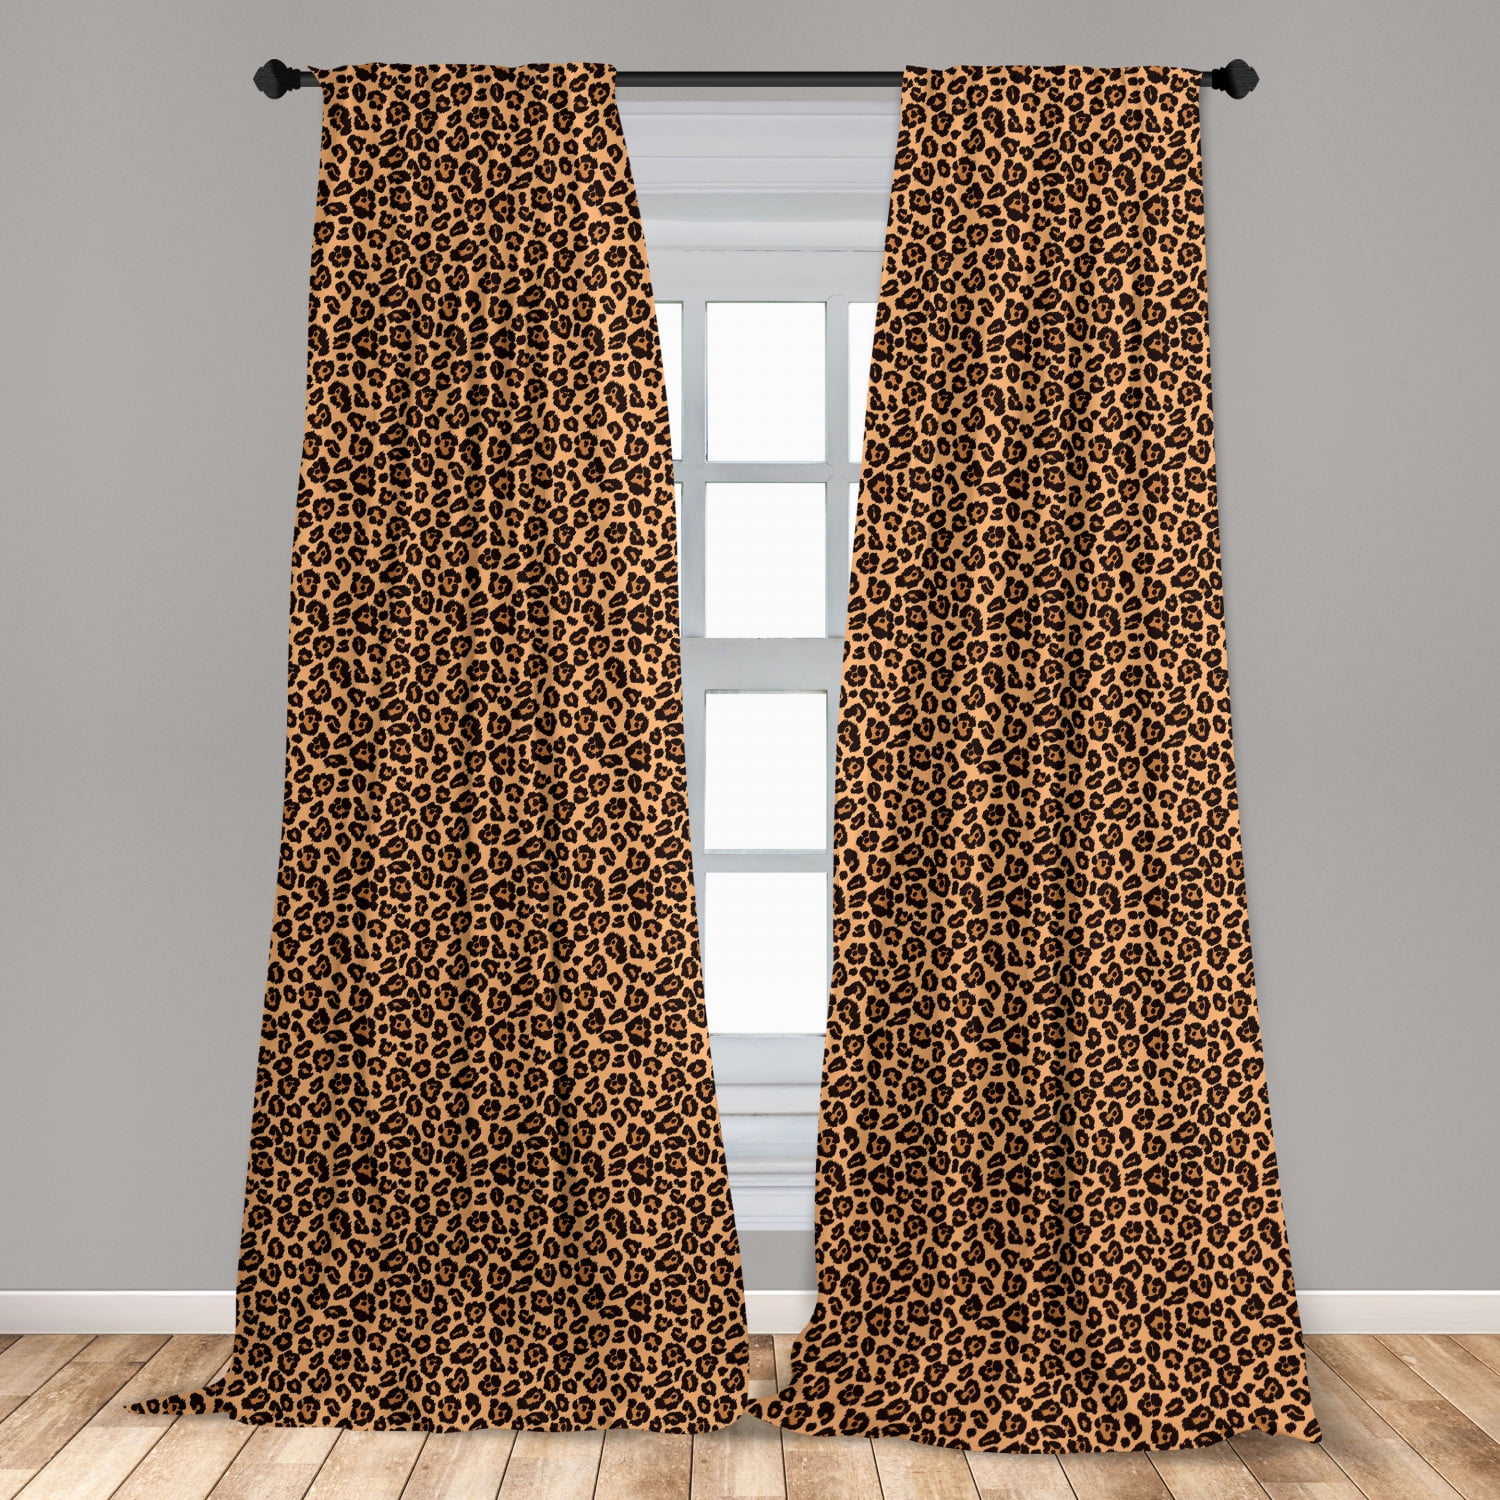 Leopard Microfiber Curtains 2 Panel Set for Living Room Bedroom in 3 Sizes 